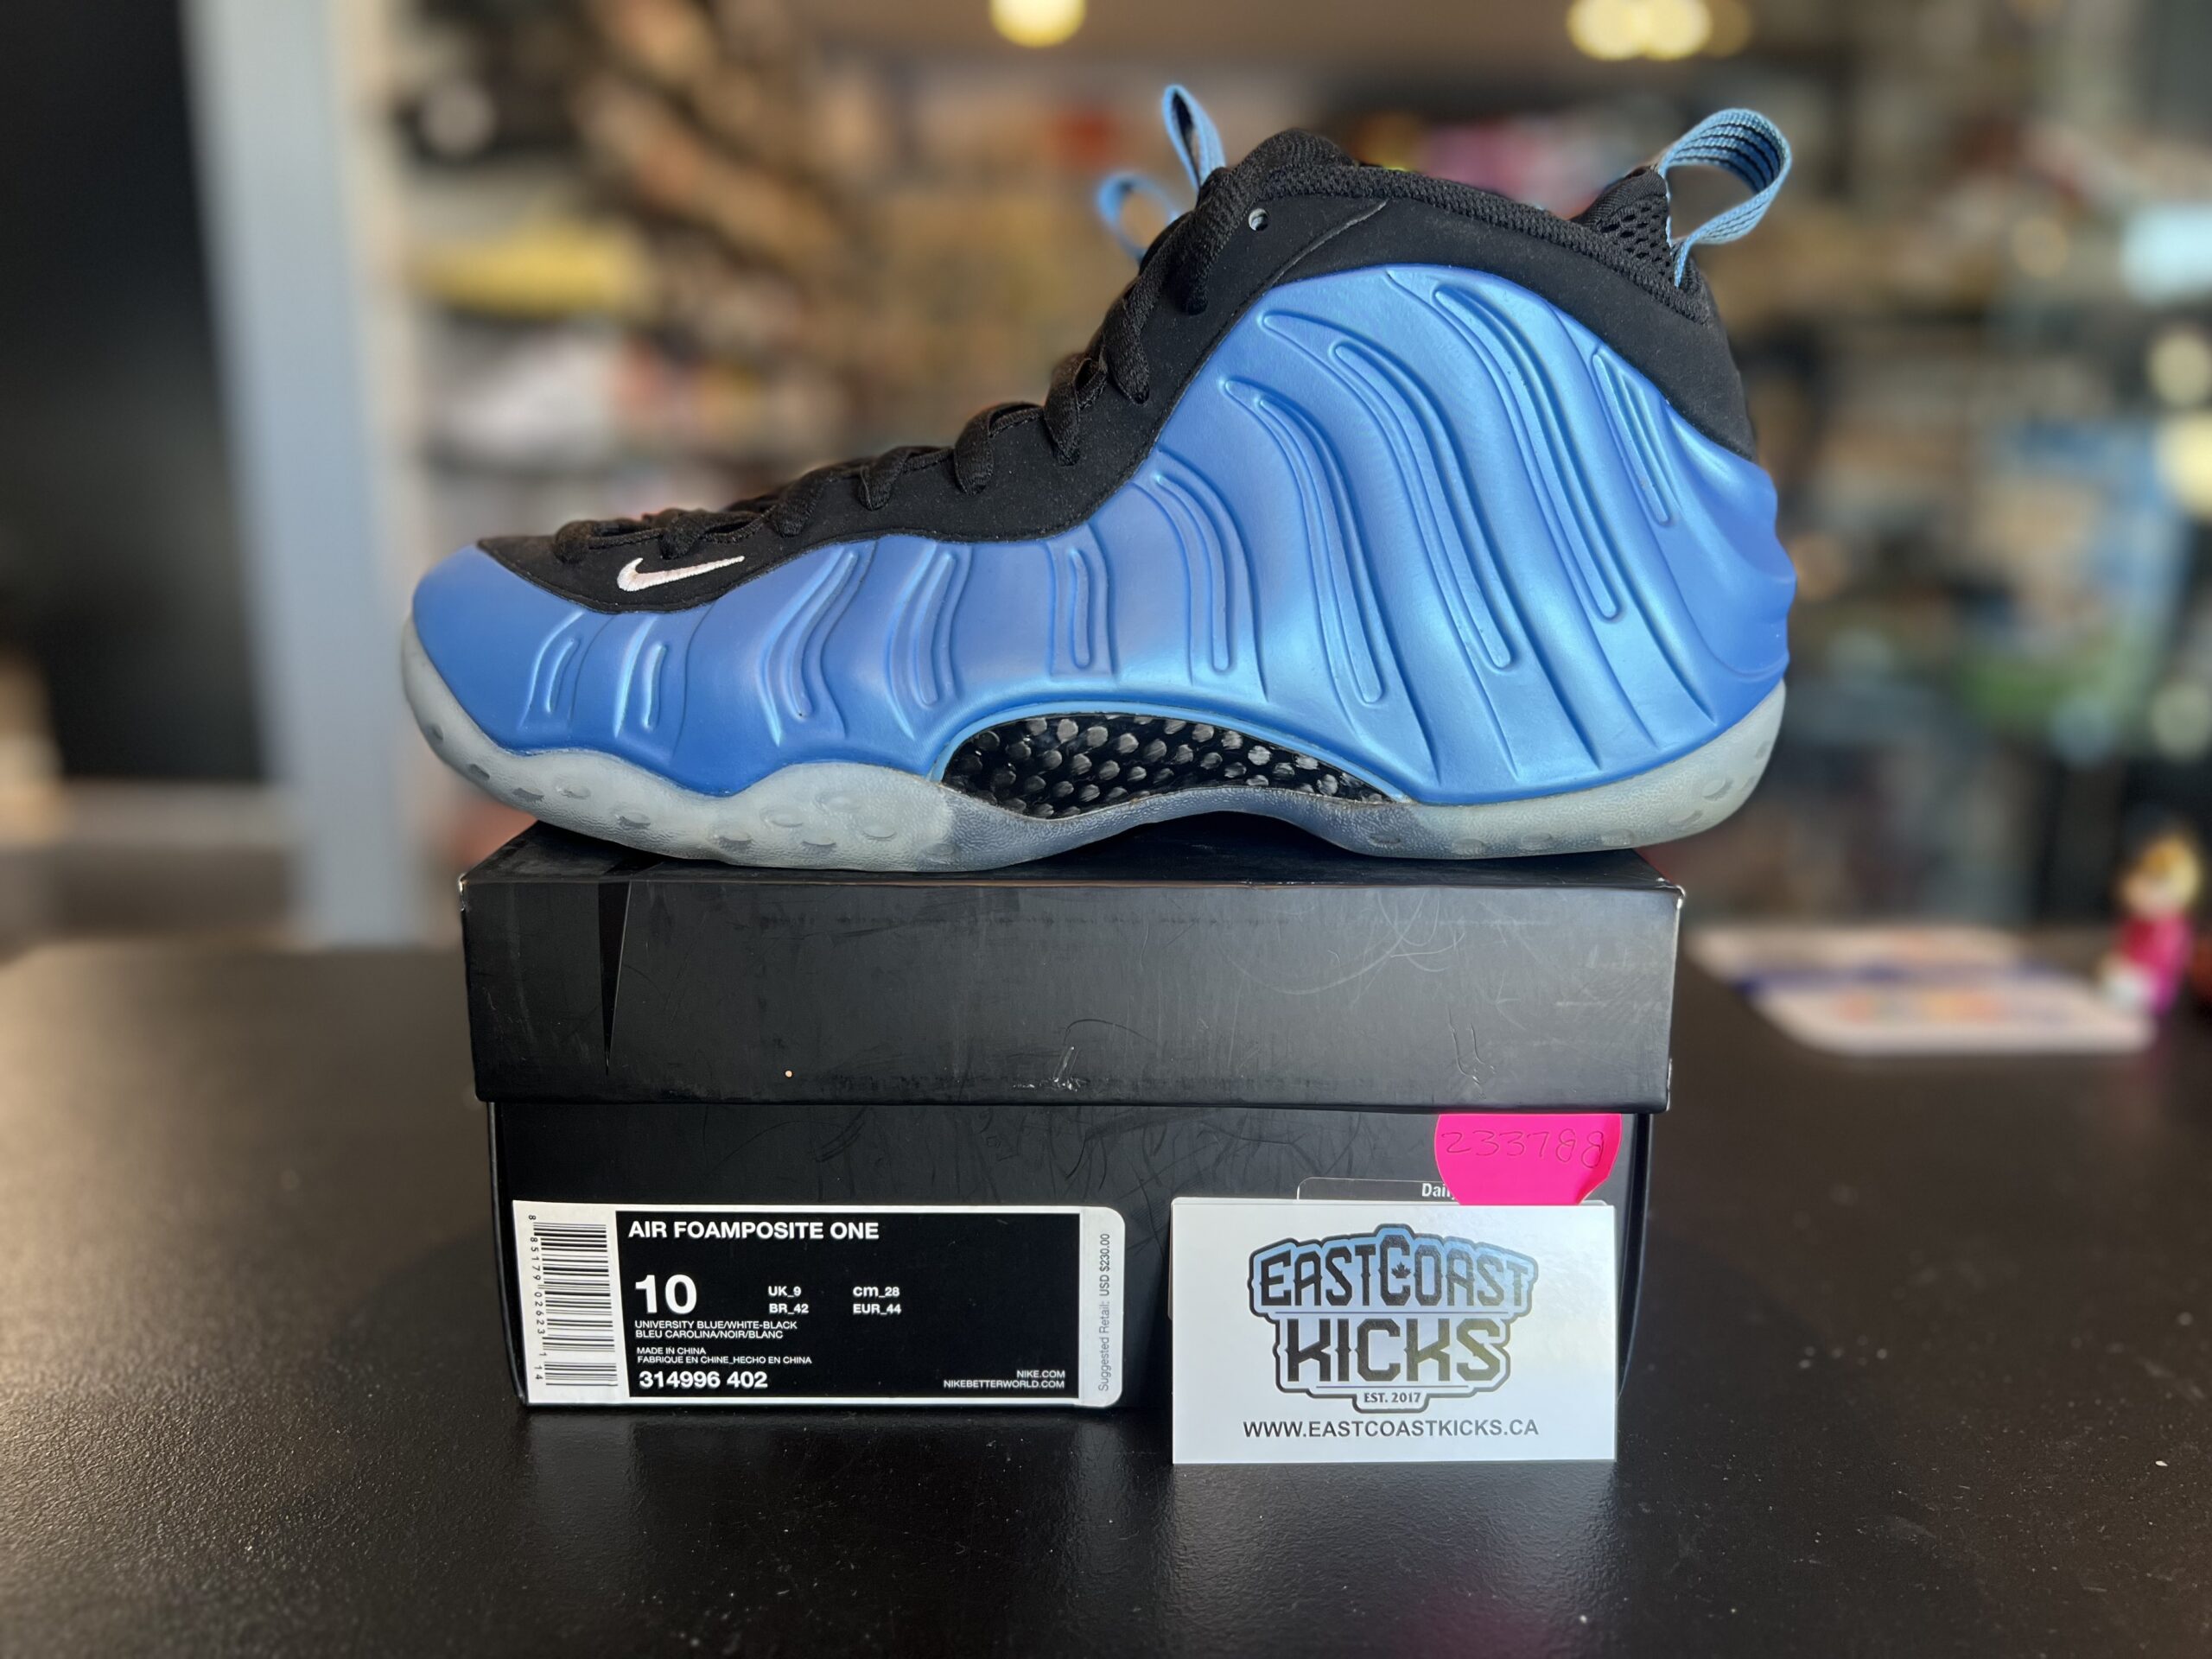 Preowned Nike Air Foamposite One University Blue Size 10